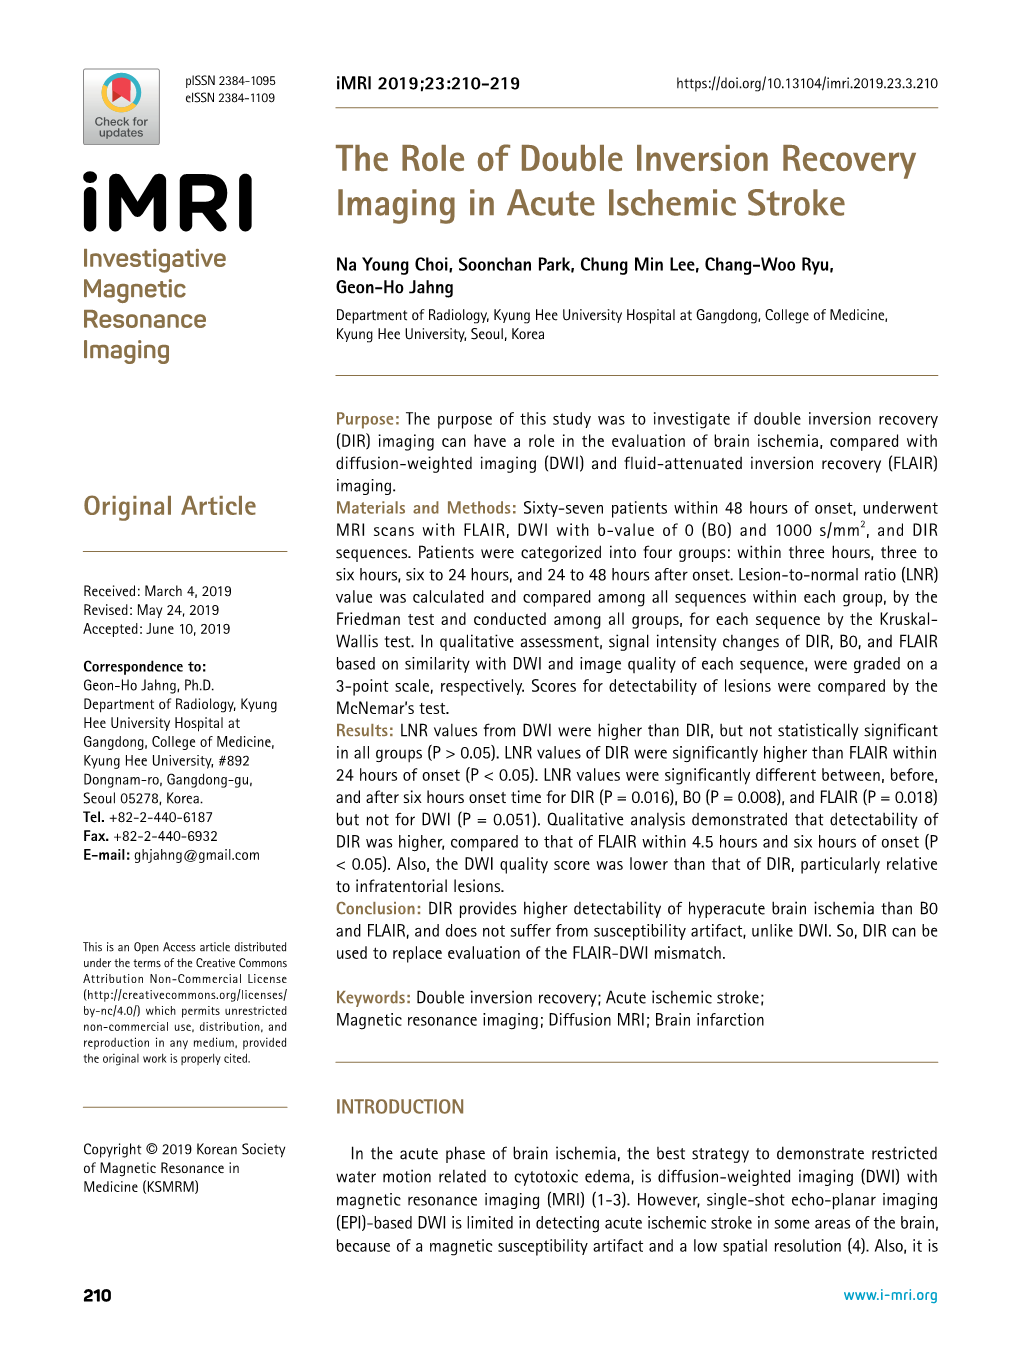 The Role of Double Inversion Recovery Imaging in Acute Ischemic Stroke